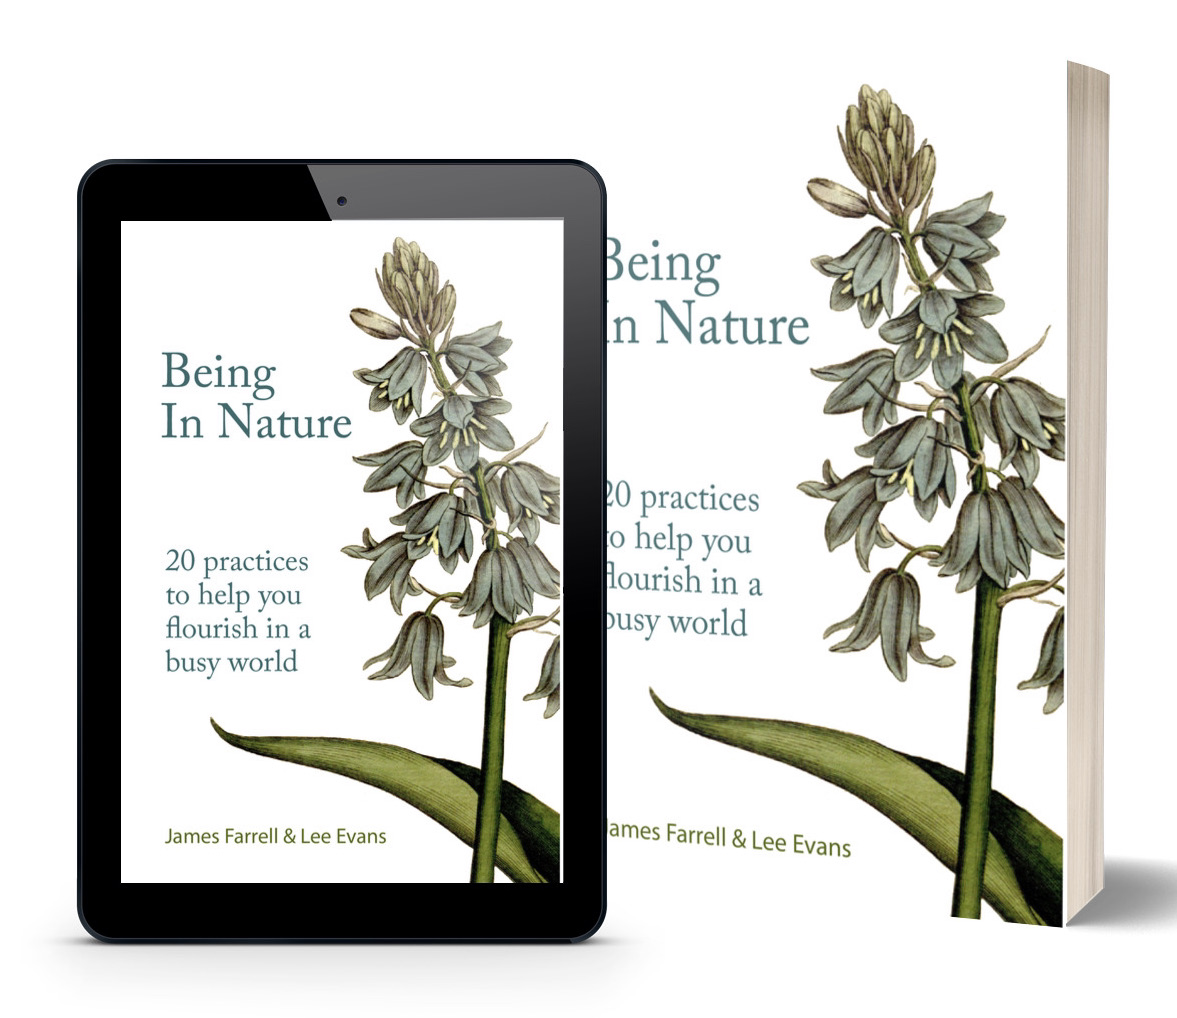 Being in Nature - ebook cover, by James Farrell and Lee Evans